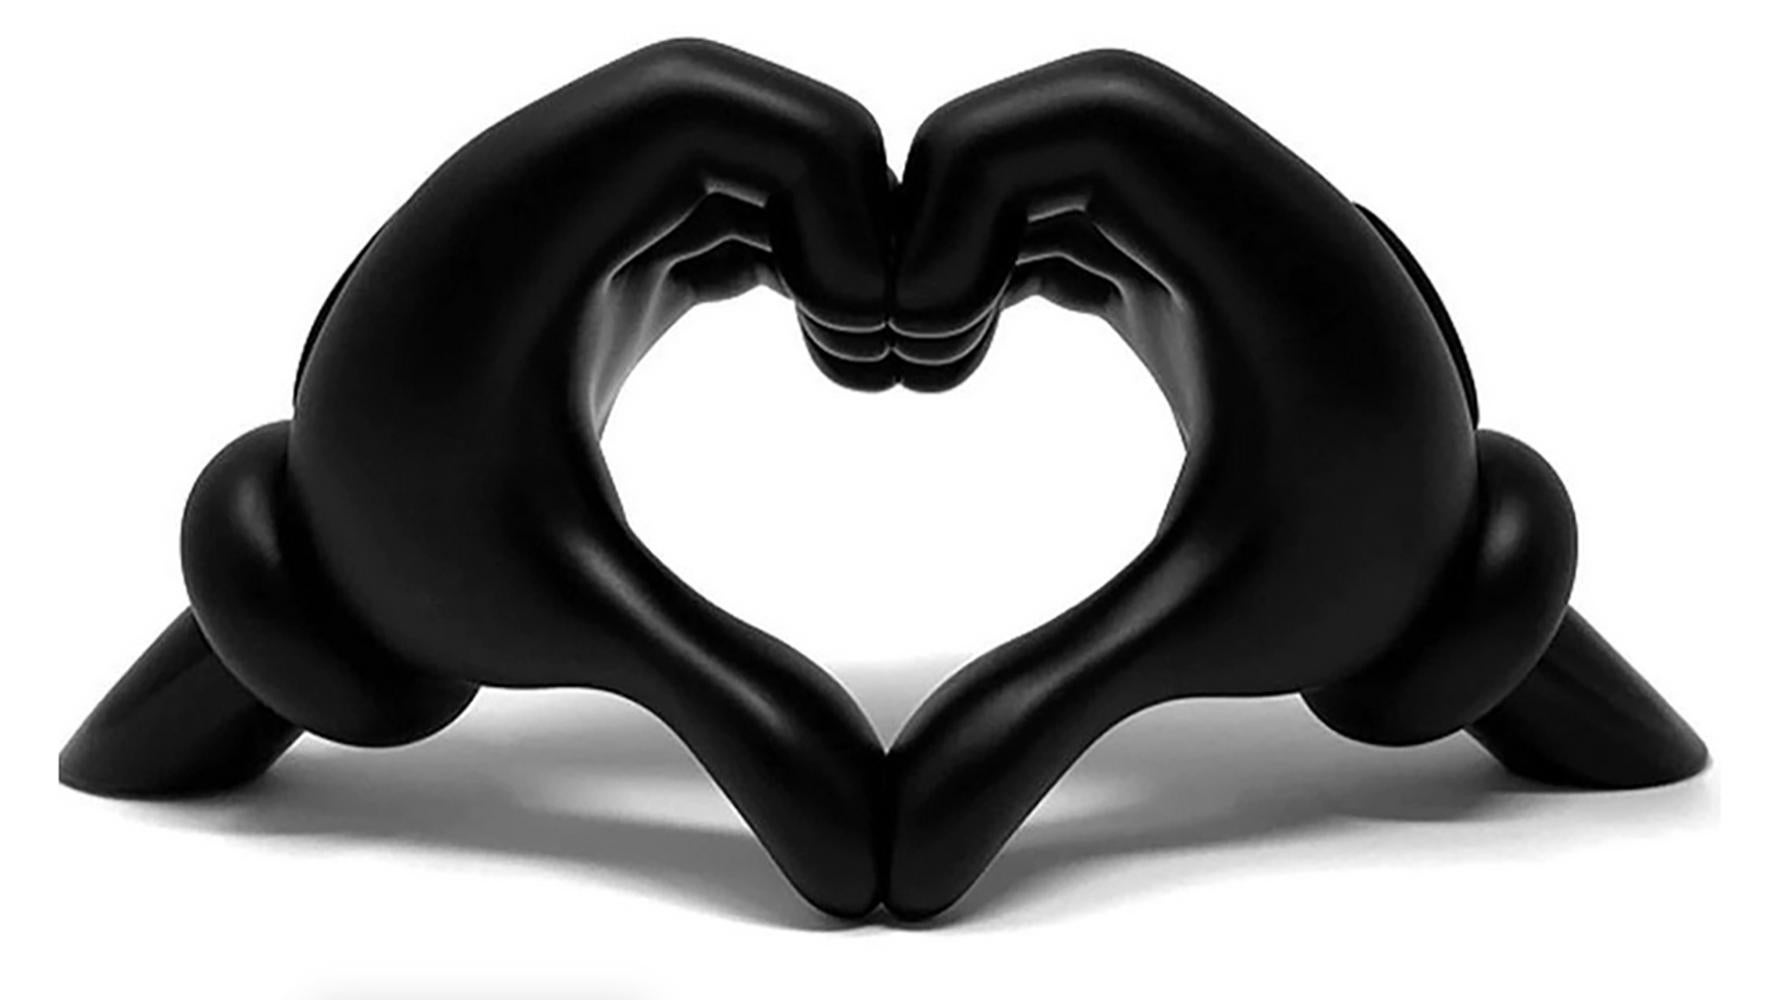 LOVE GLOVES VINYL FIGURE: SLICK EDITION Matte Black w/Gloss Black Accents Edition of 500 
Size: 5 Inches H x 10 Inches W (12.7cm x 25.4cm)
SOLD OUT - Slick Edition
Brand new in perfect condition.

Slick’s work has been presented in a variety of